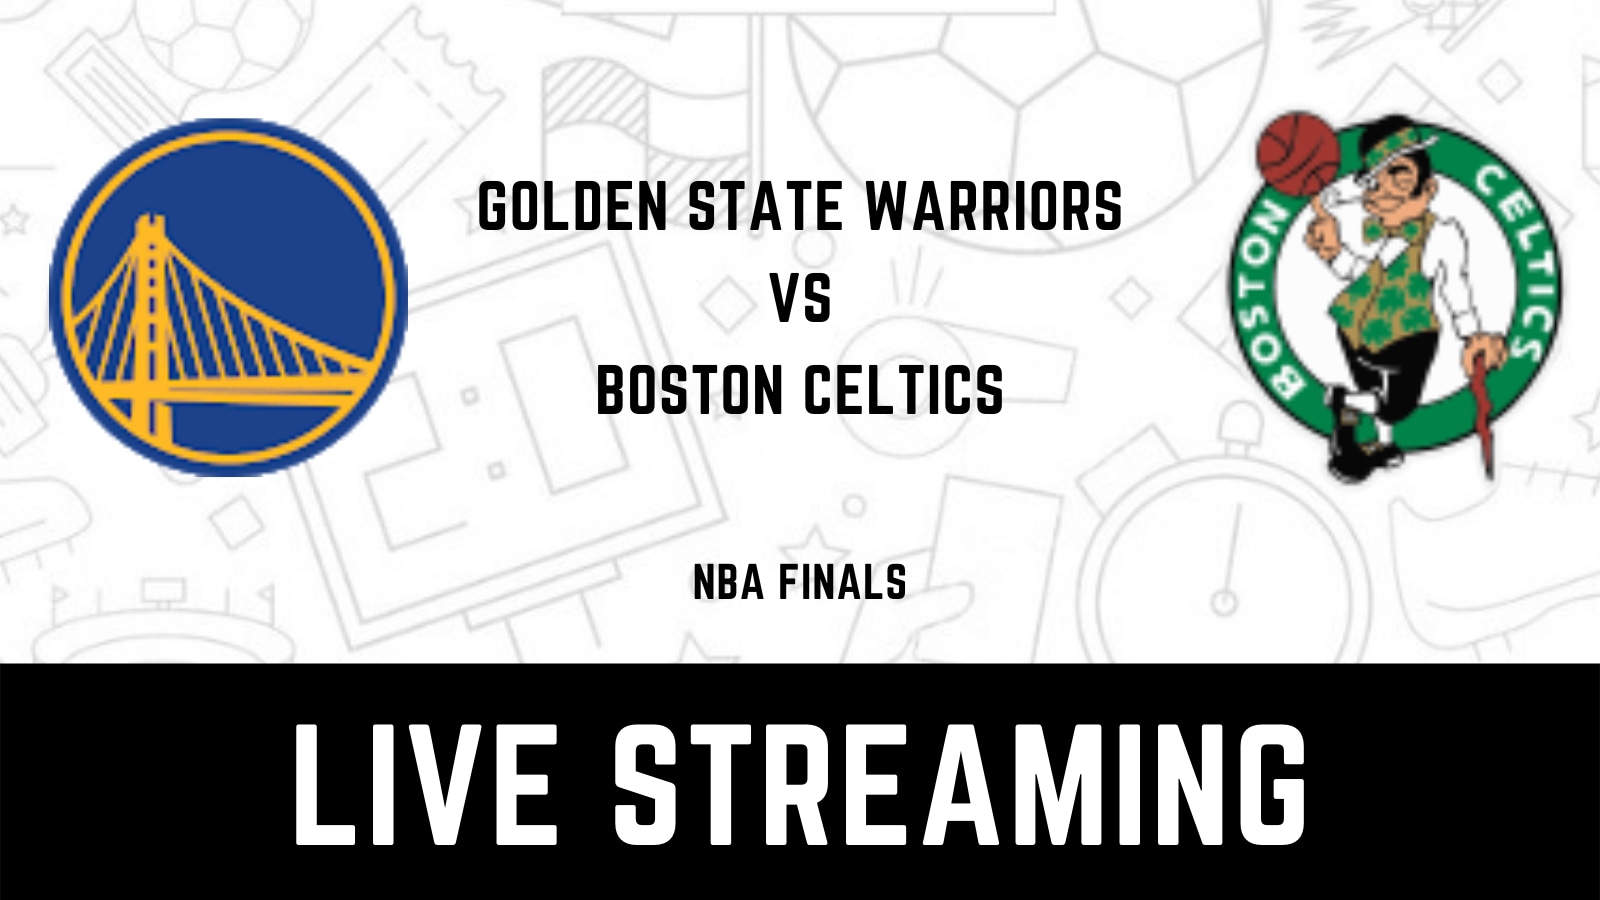 Golden State Warriors vs Boston Celtics Live Streaming When and Where to Watch NBA Finals Live Coverage on Live TV Online